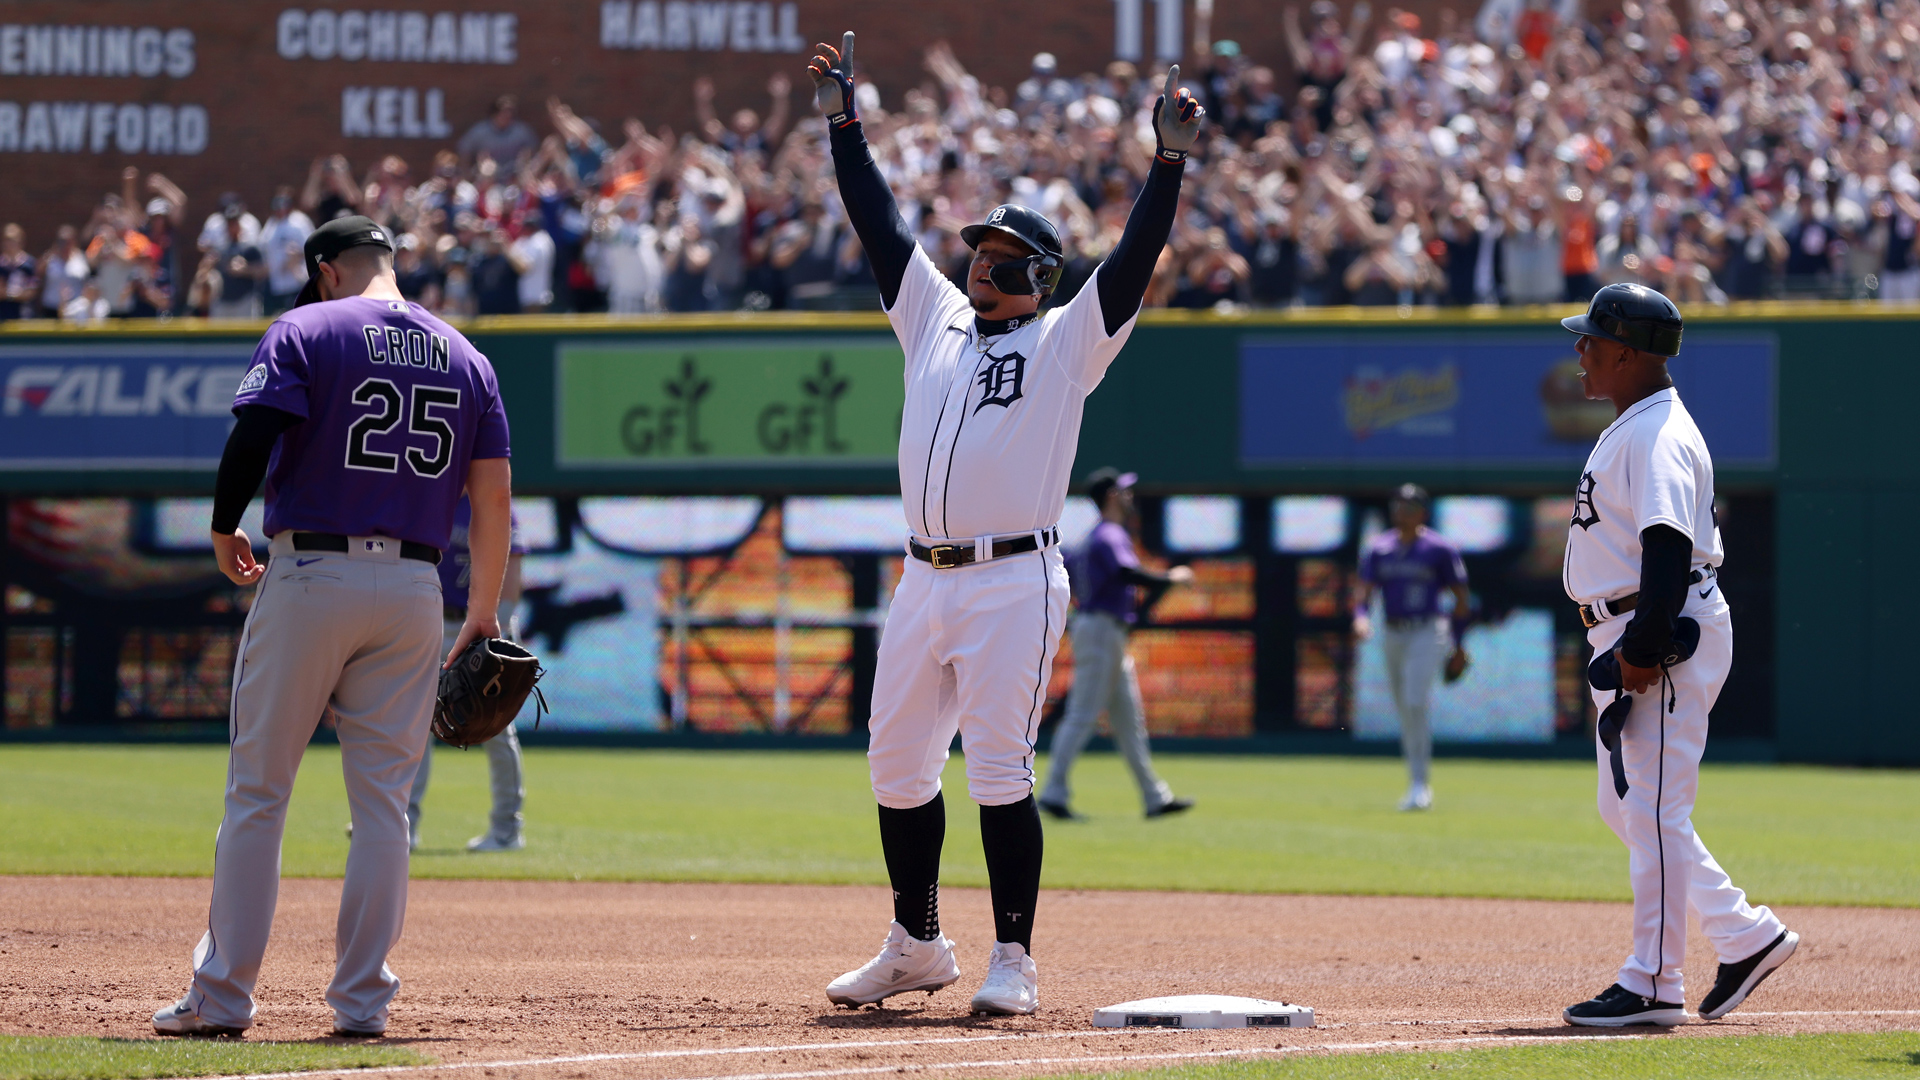 Tigers' Cabrera gets 3,000th hit; 33rd player to reach mark